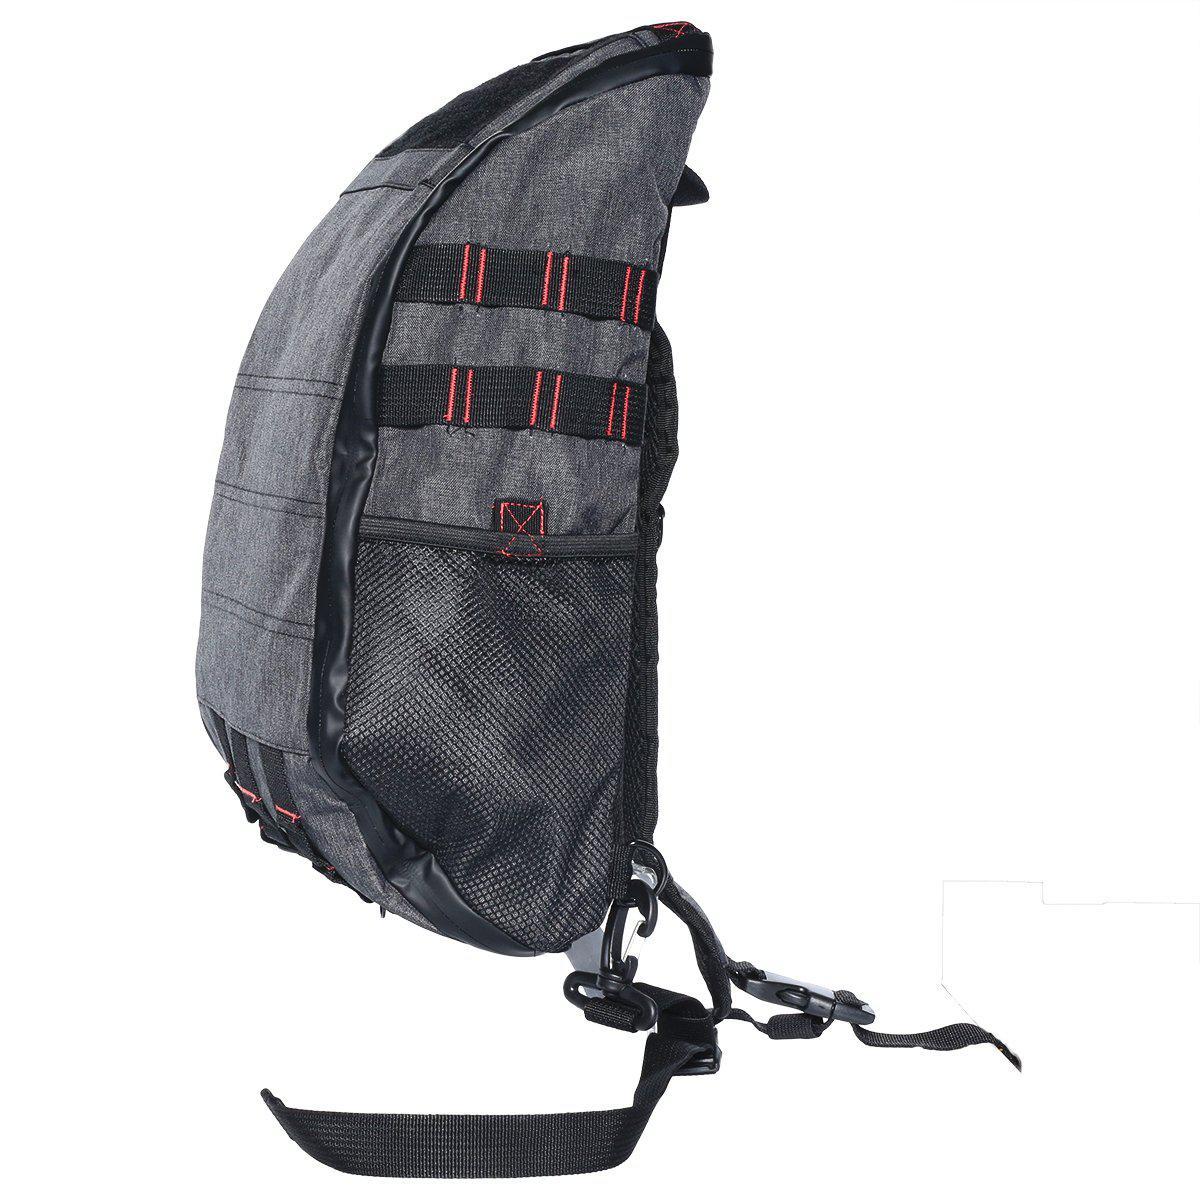 Smell Proof backpack